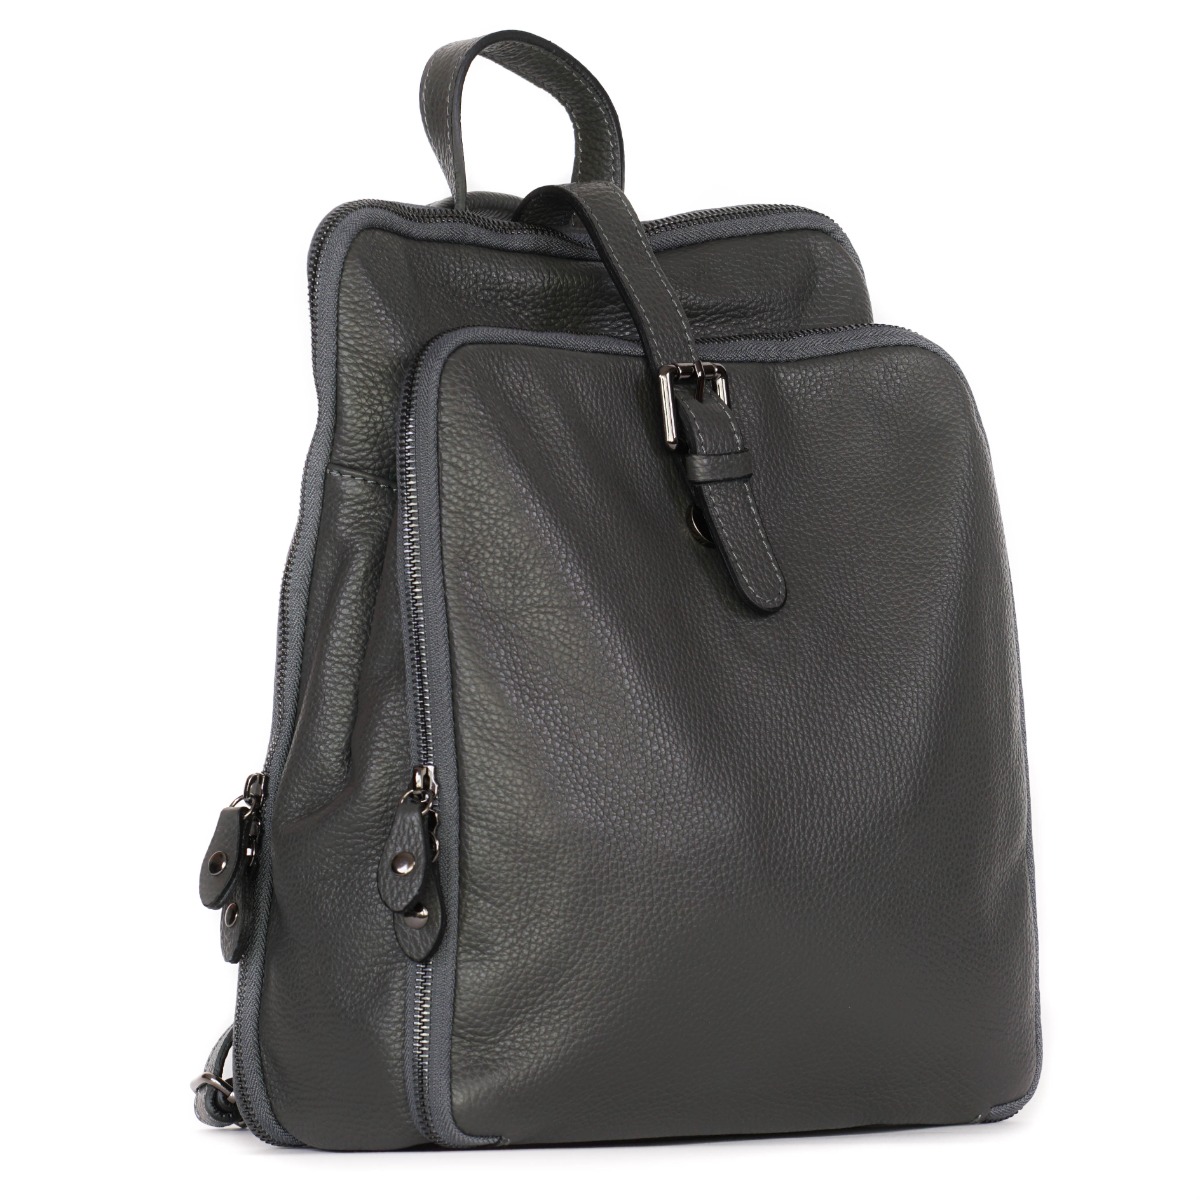 Soft genuine leather convertible backpack bag grey 